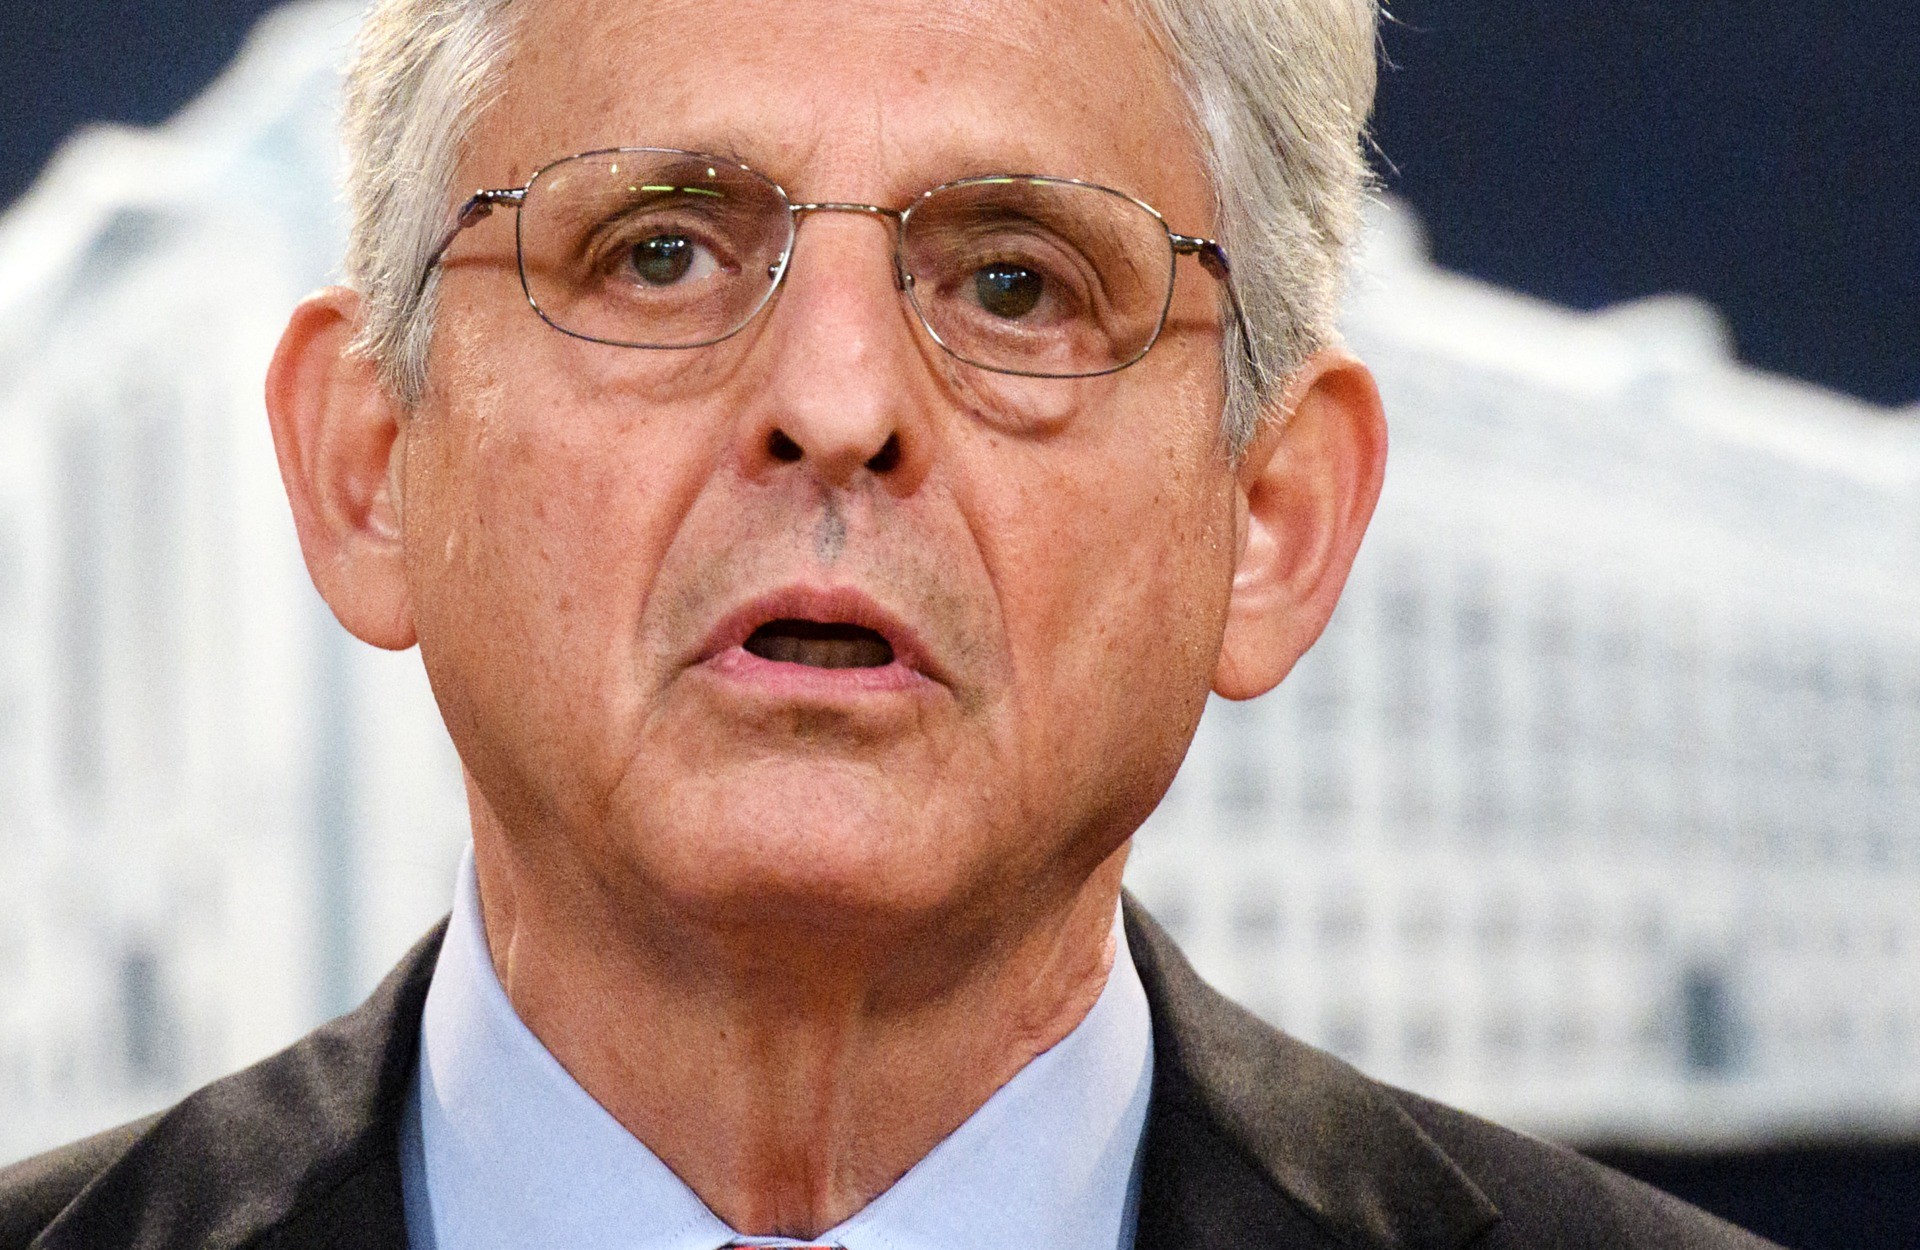 US Attorney General Merrick Garland holds a press conference to announce a lawsuit against Texas at the Department of Justice in Washington, DC on September 9, 2021 - The US Justice Department filed suit against the state of Texas on Thursday over its new law that bans abortions after six weeks of pregnancy. (Photo by Mandel NGAN / AFP) (Photo by MANDEL NGAN/AFP via Getty Images)